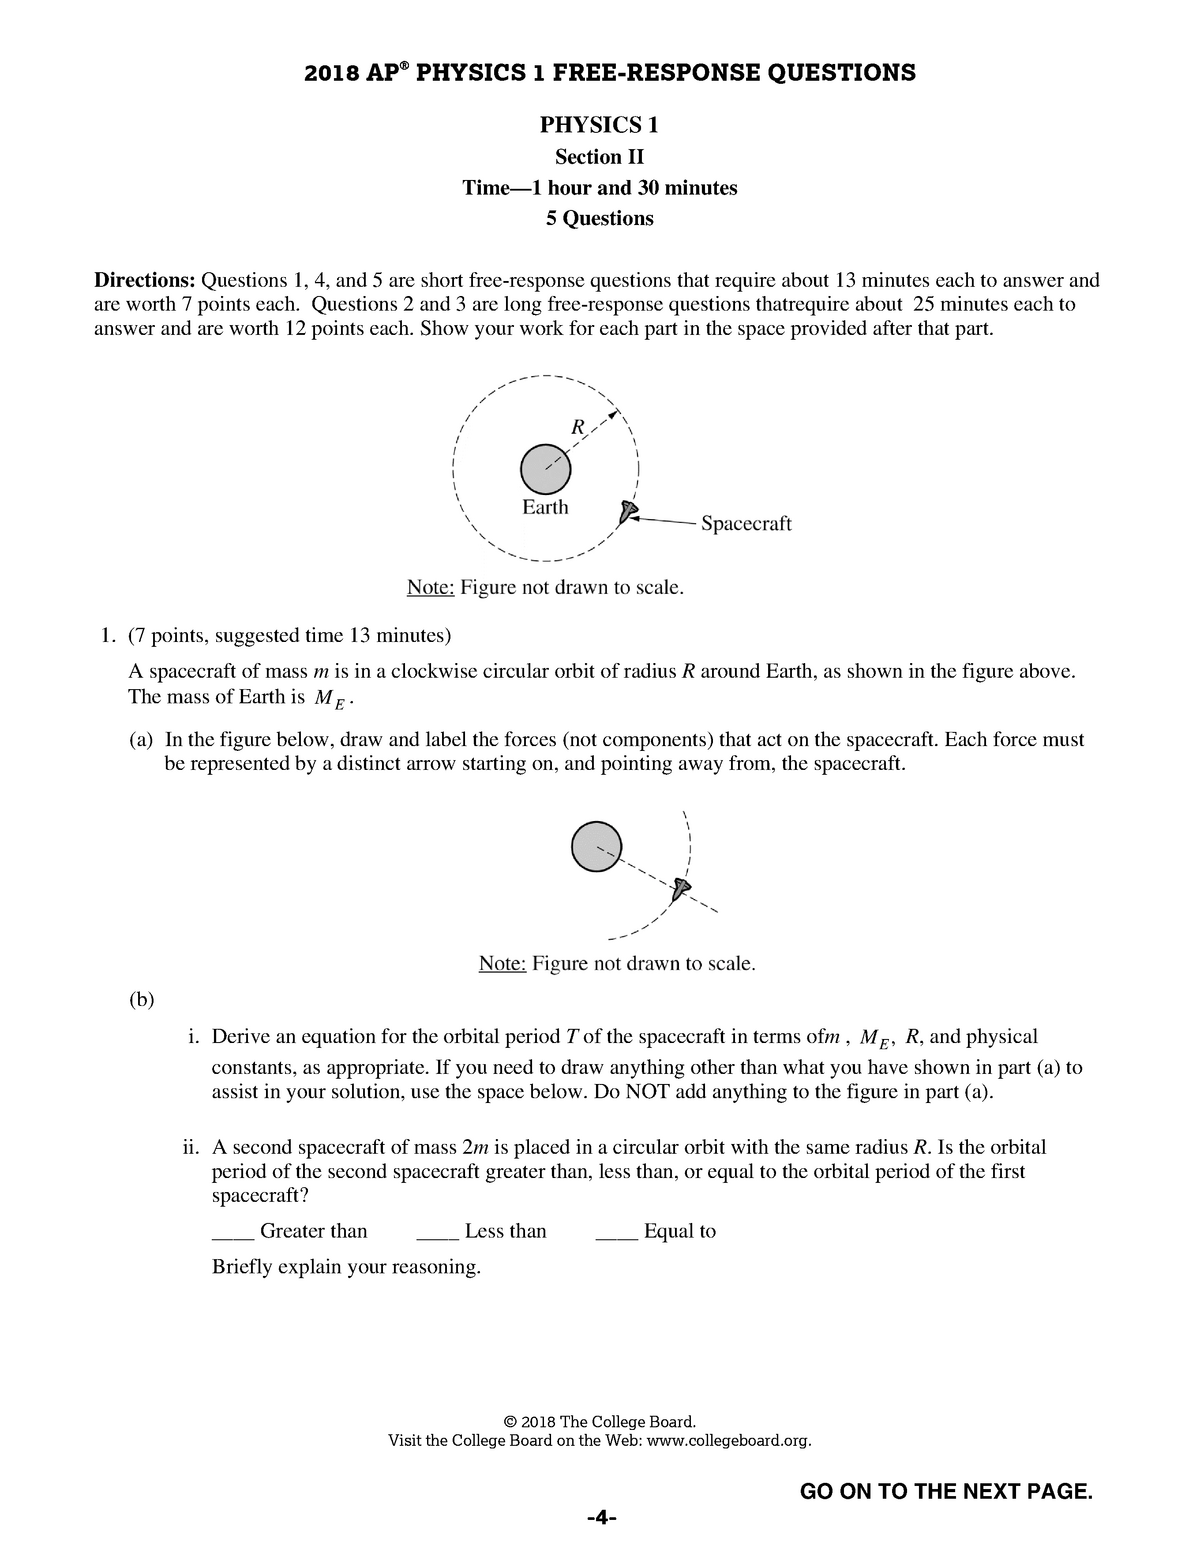 Ap Physics 1 2018 Free Response Questions Physics 1 Section Ii Time—1